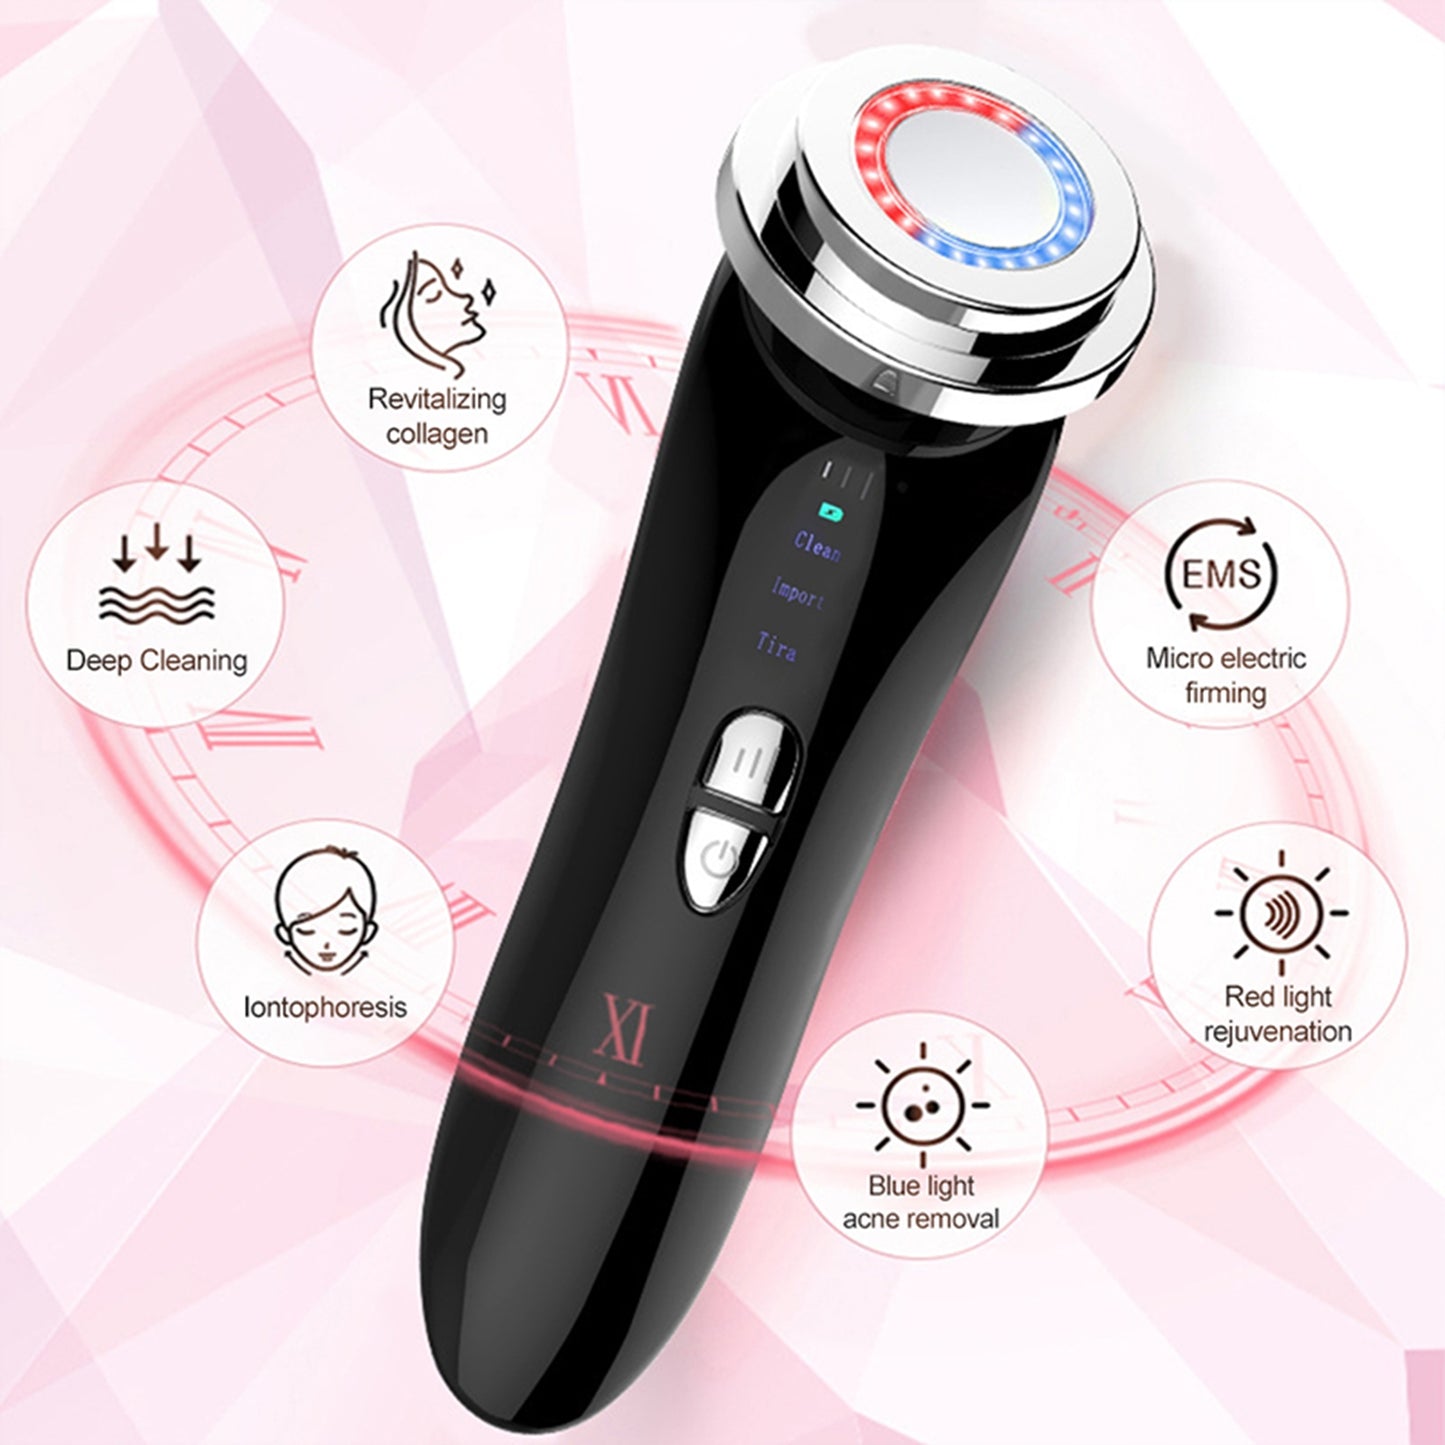 Professional Beauty Instrument USB Charging Ems Photon Skin Tightening Cleansing Skin Care Tools Pink and Black